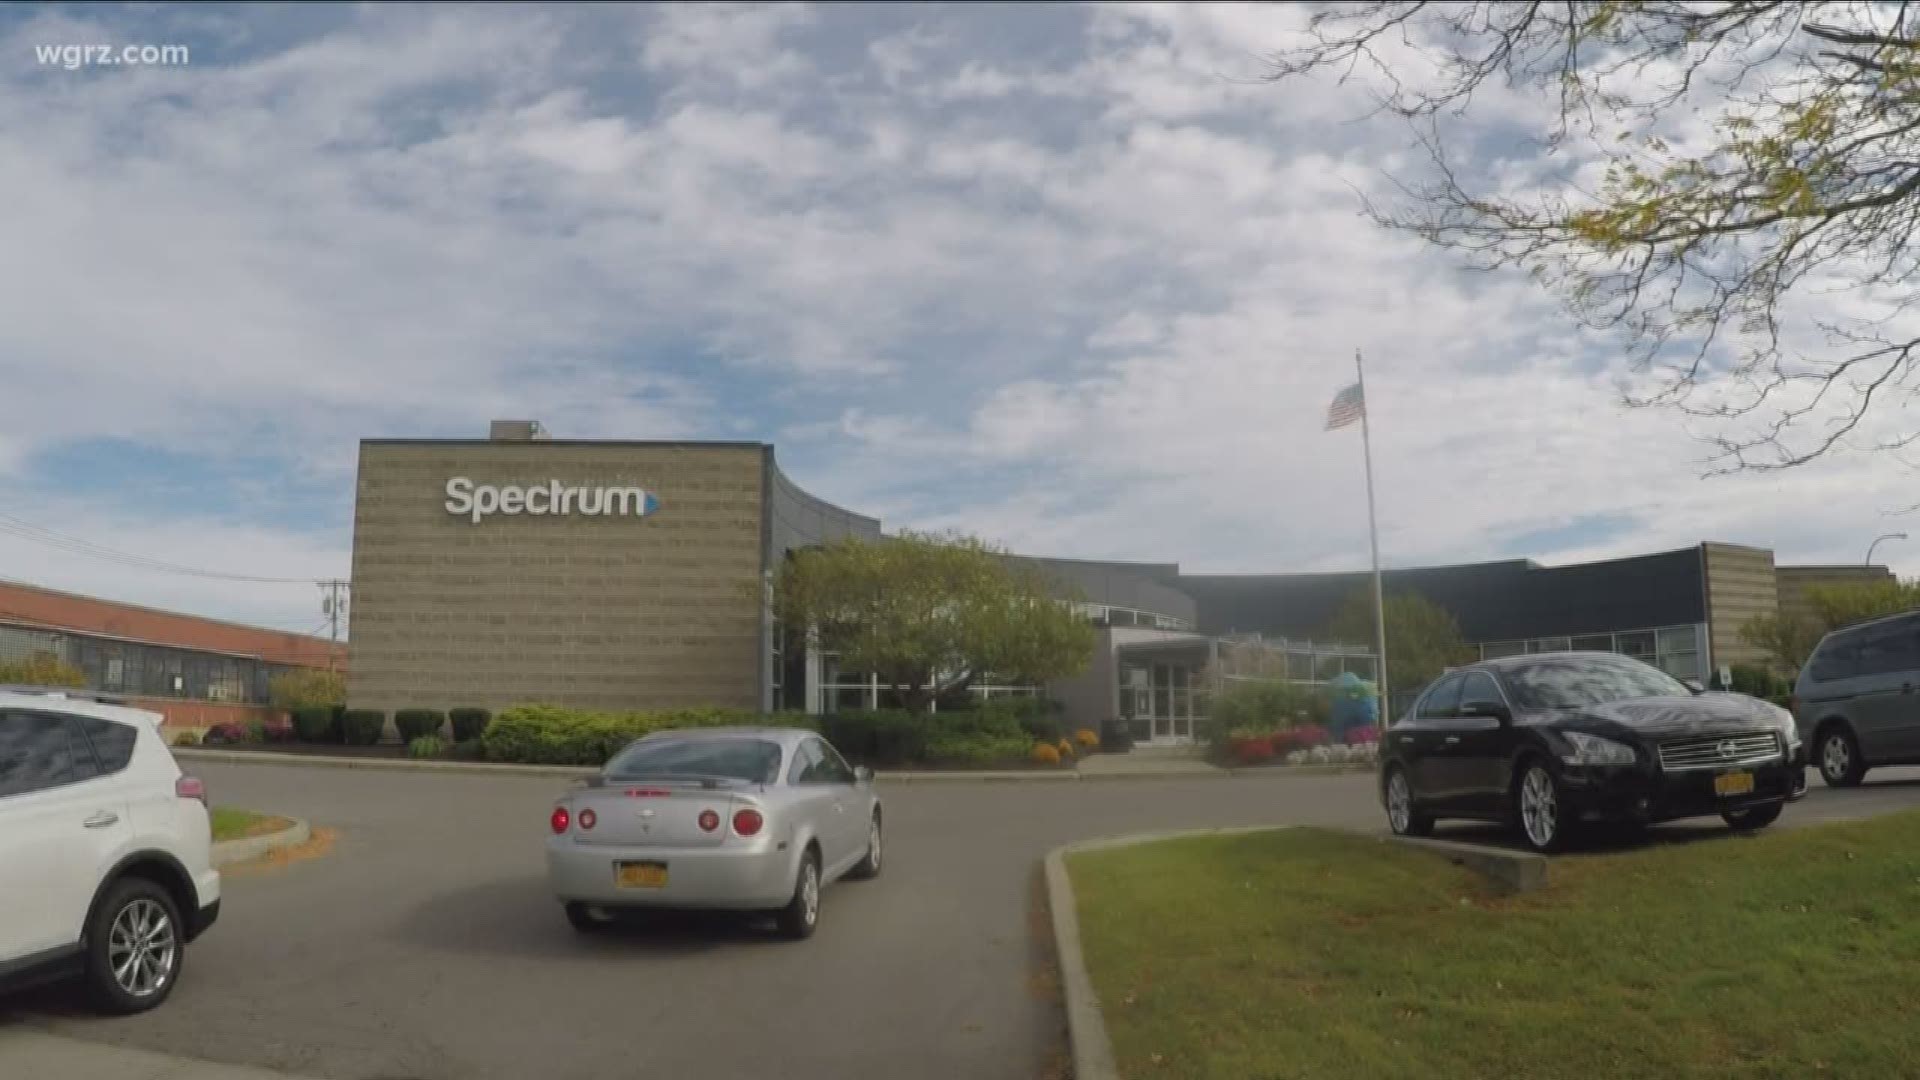 Charter Spectrum will pay a record $174 million and refund customers in New York $62 million in a settlement over claims it defrauded internet subscribers.